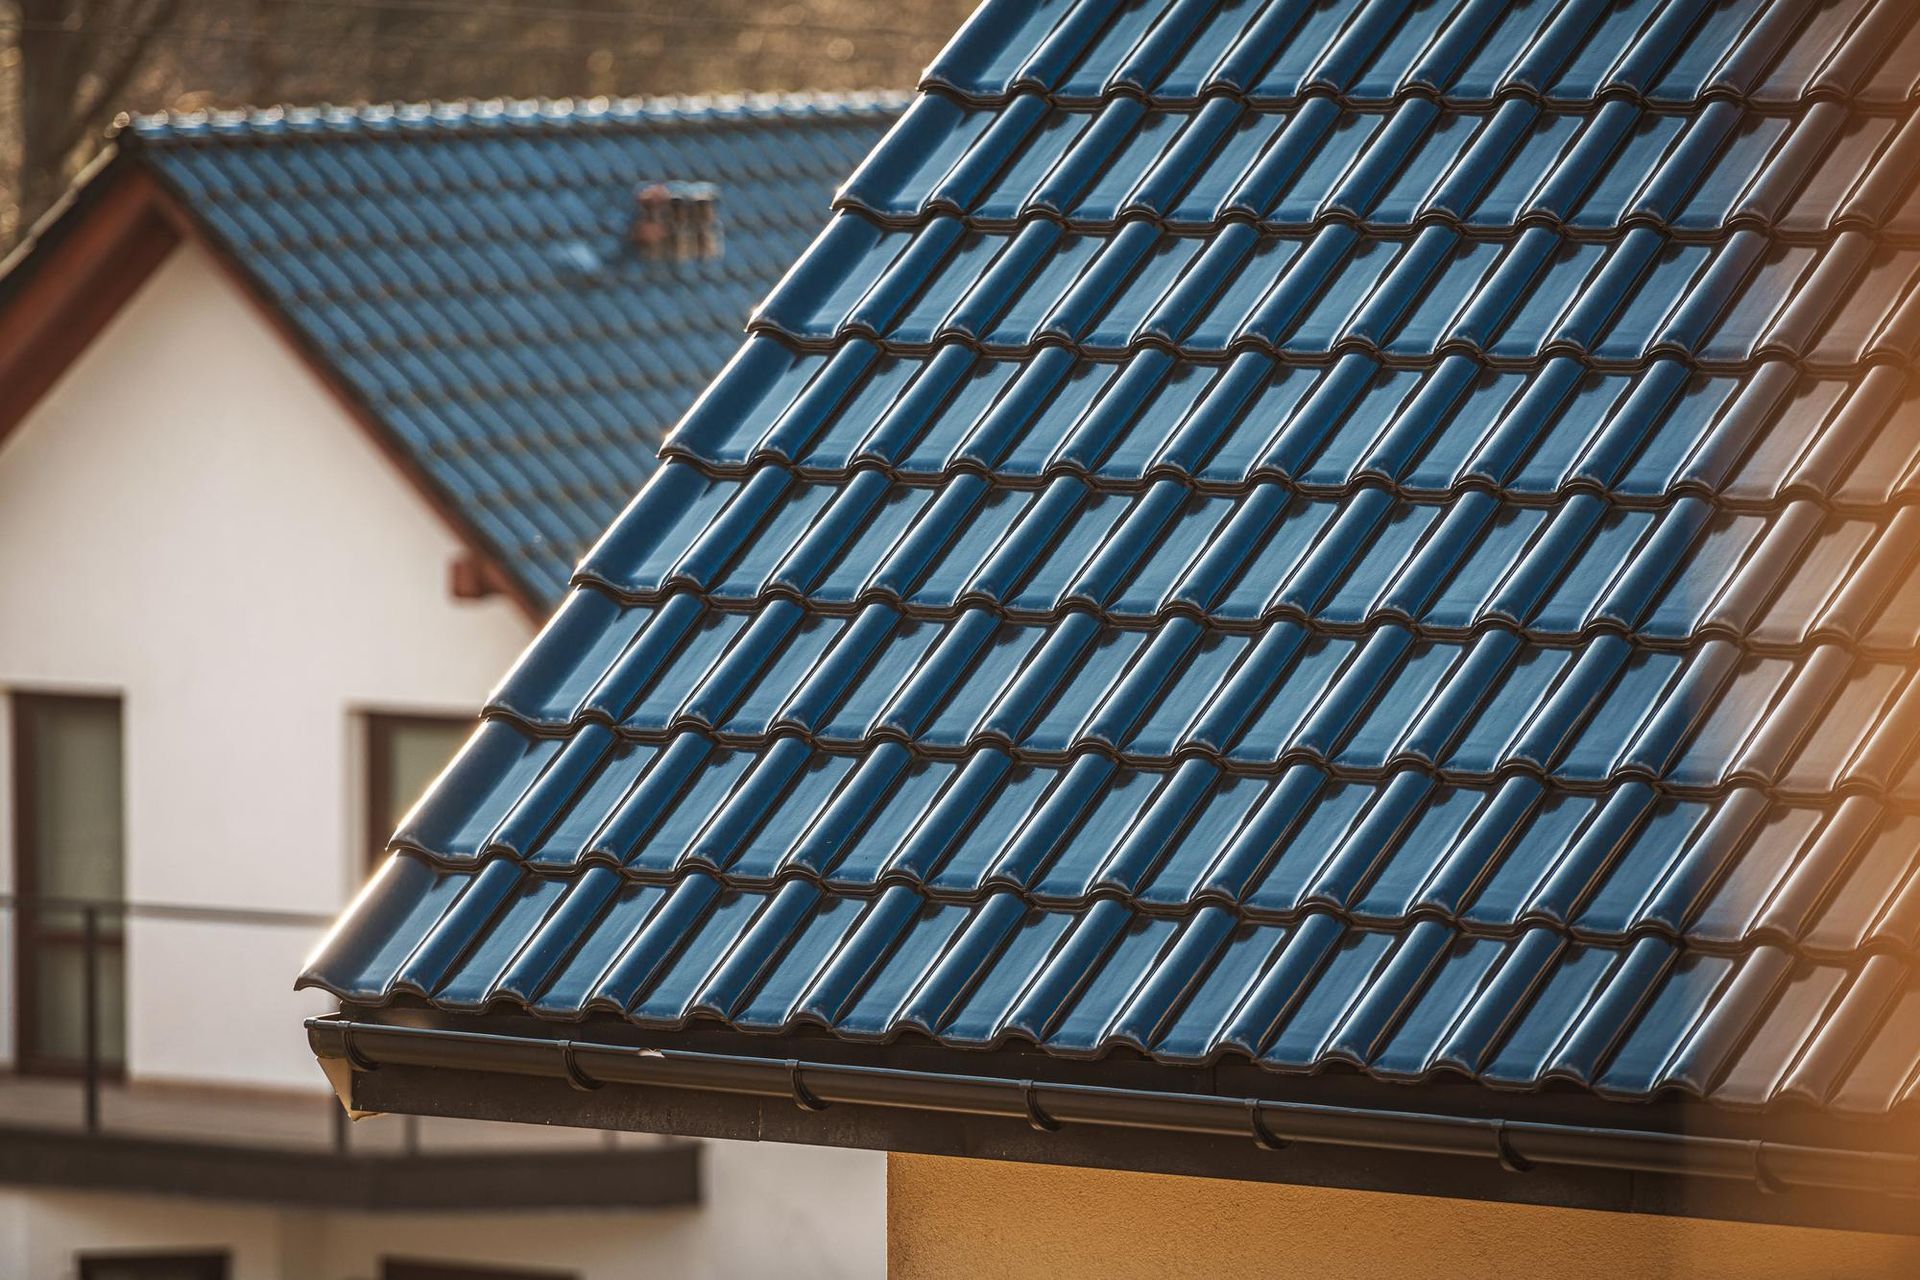 A close up of a blue tiled roof on a house.